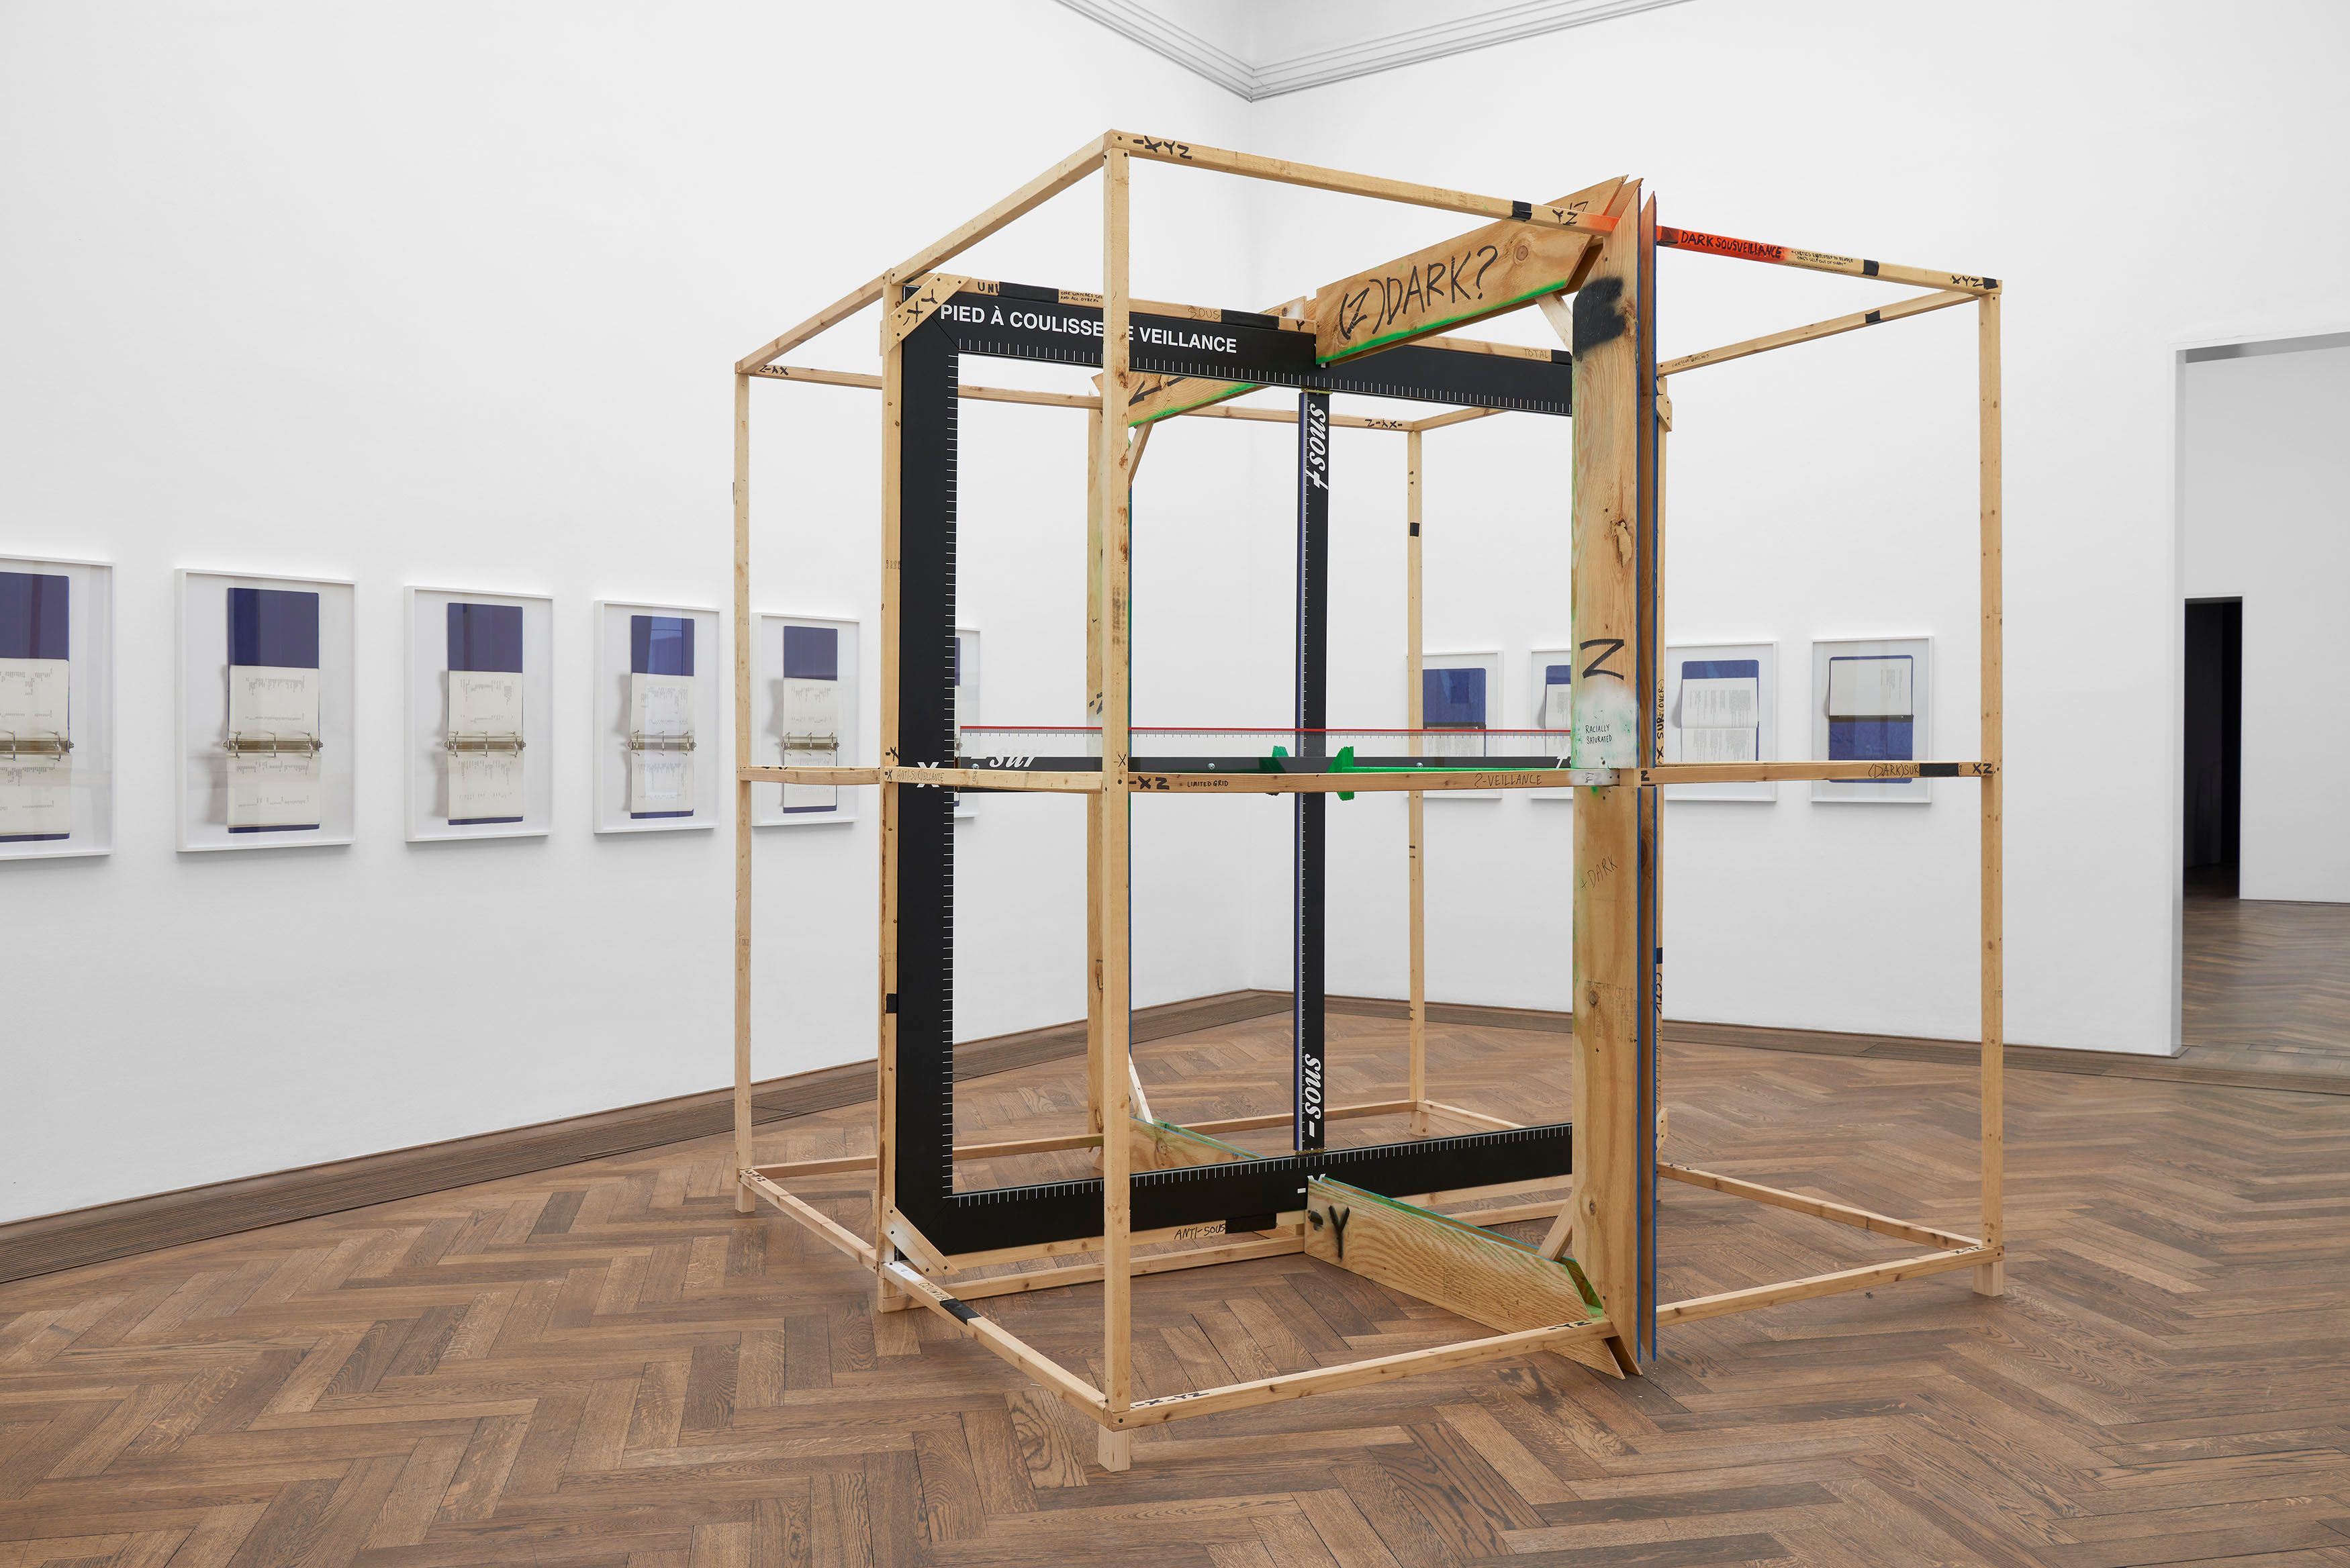 “Veillance Caliper (Annotated)” by American Artist at Kunsthalle Basel